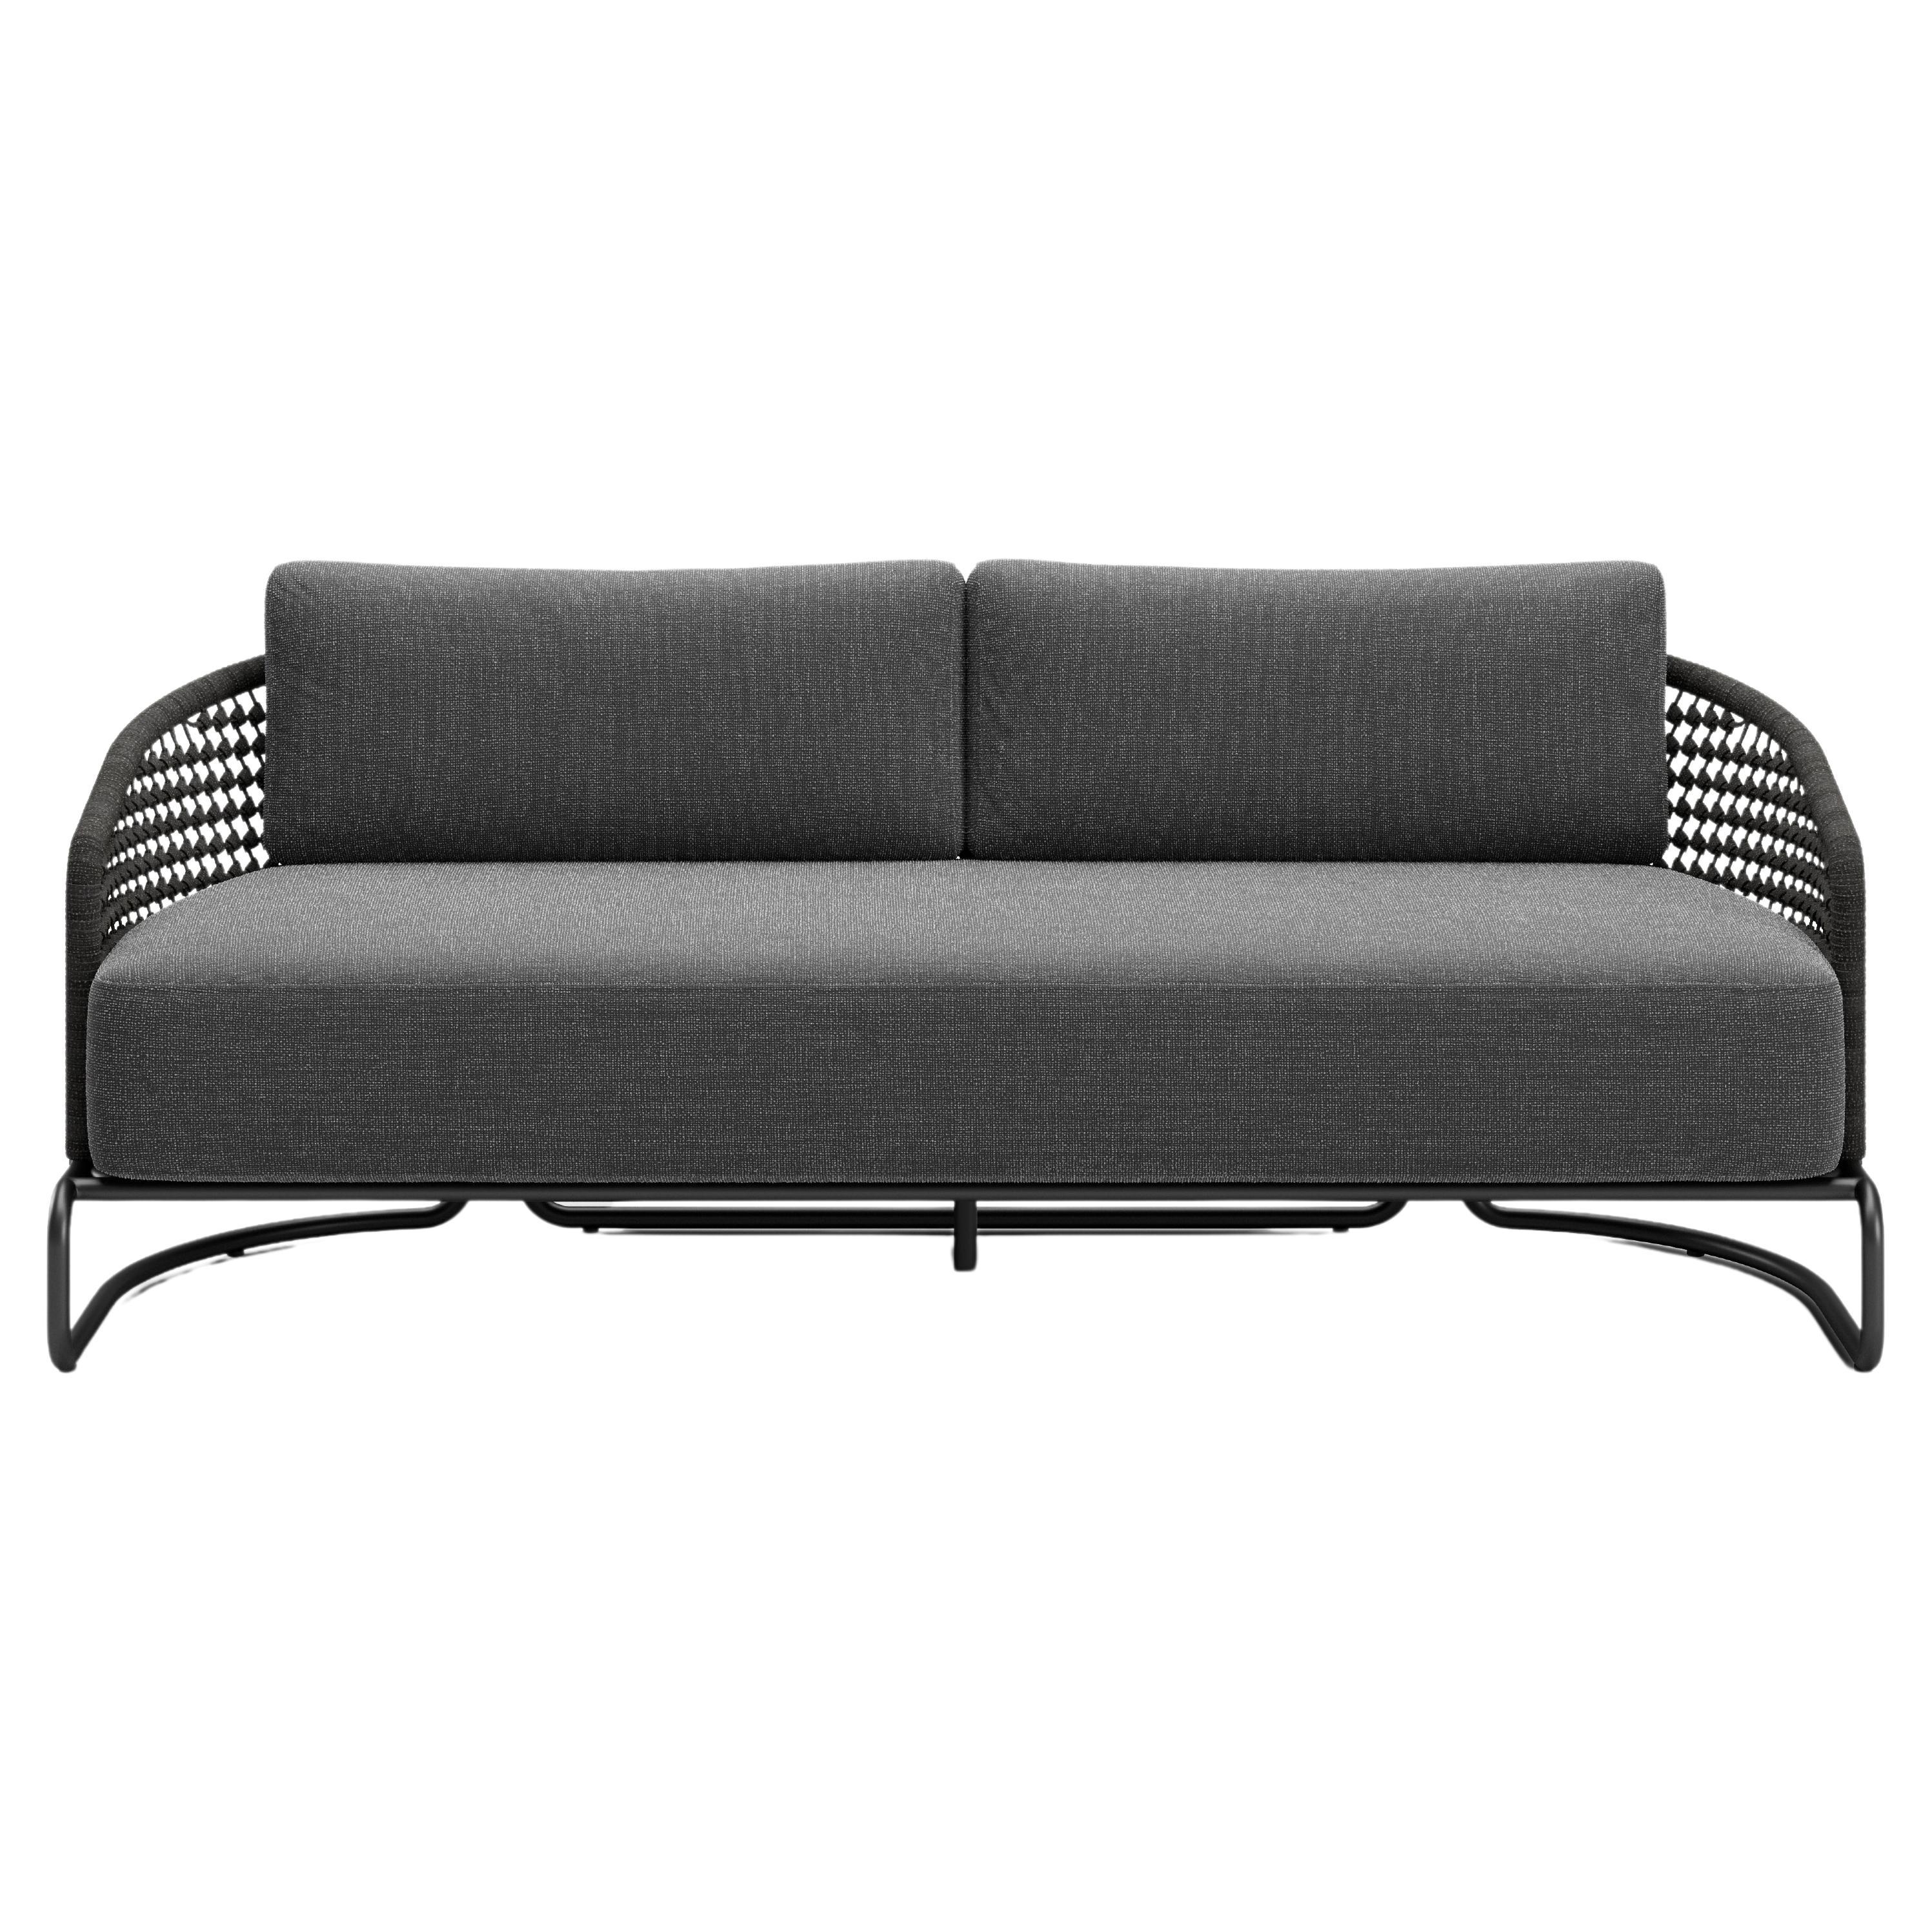 Pigalle Outdoor 2 Seater Sofa by Snoc